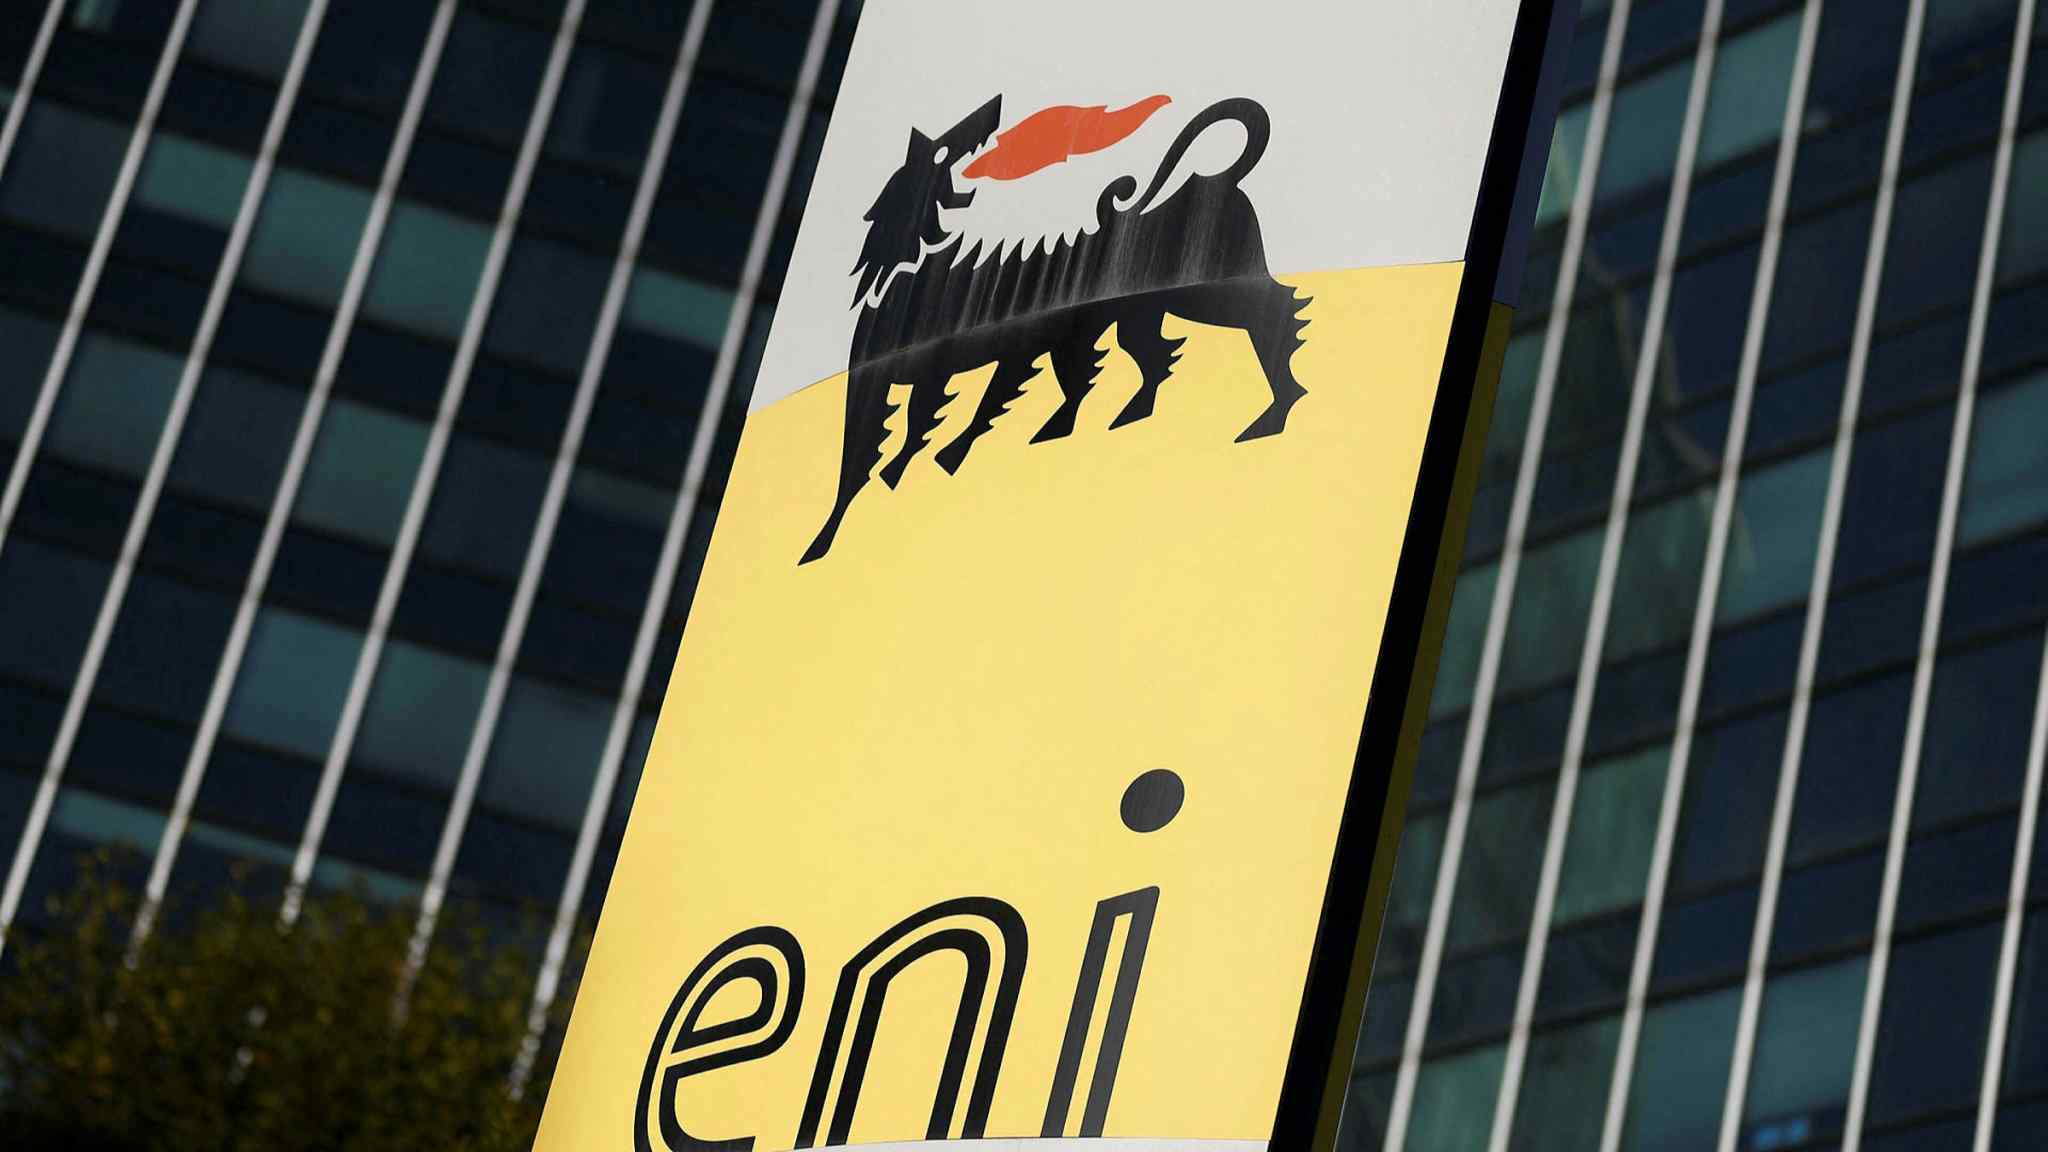 Live news: ENI to open rouble bank account to buy Russian gas